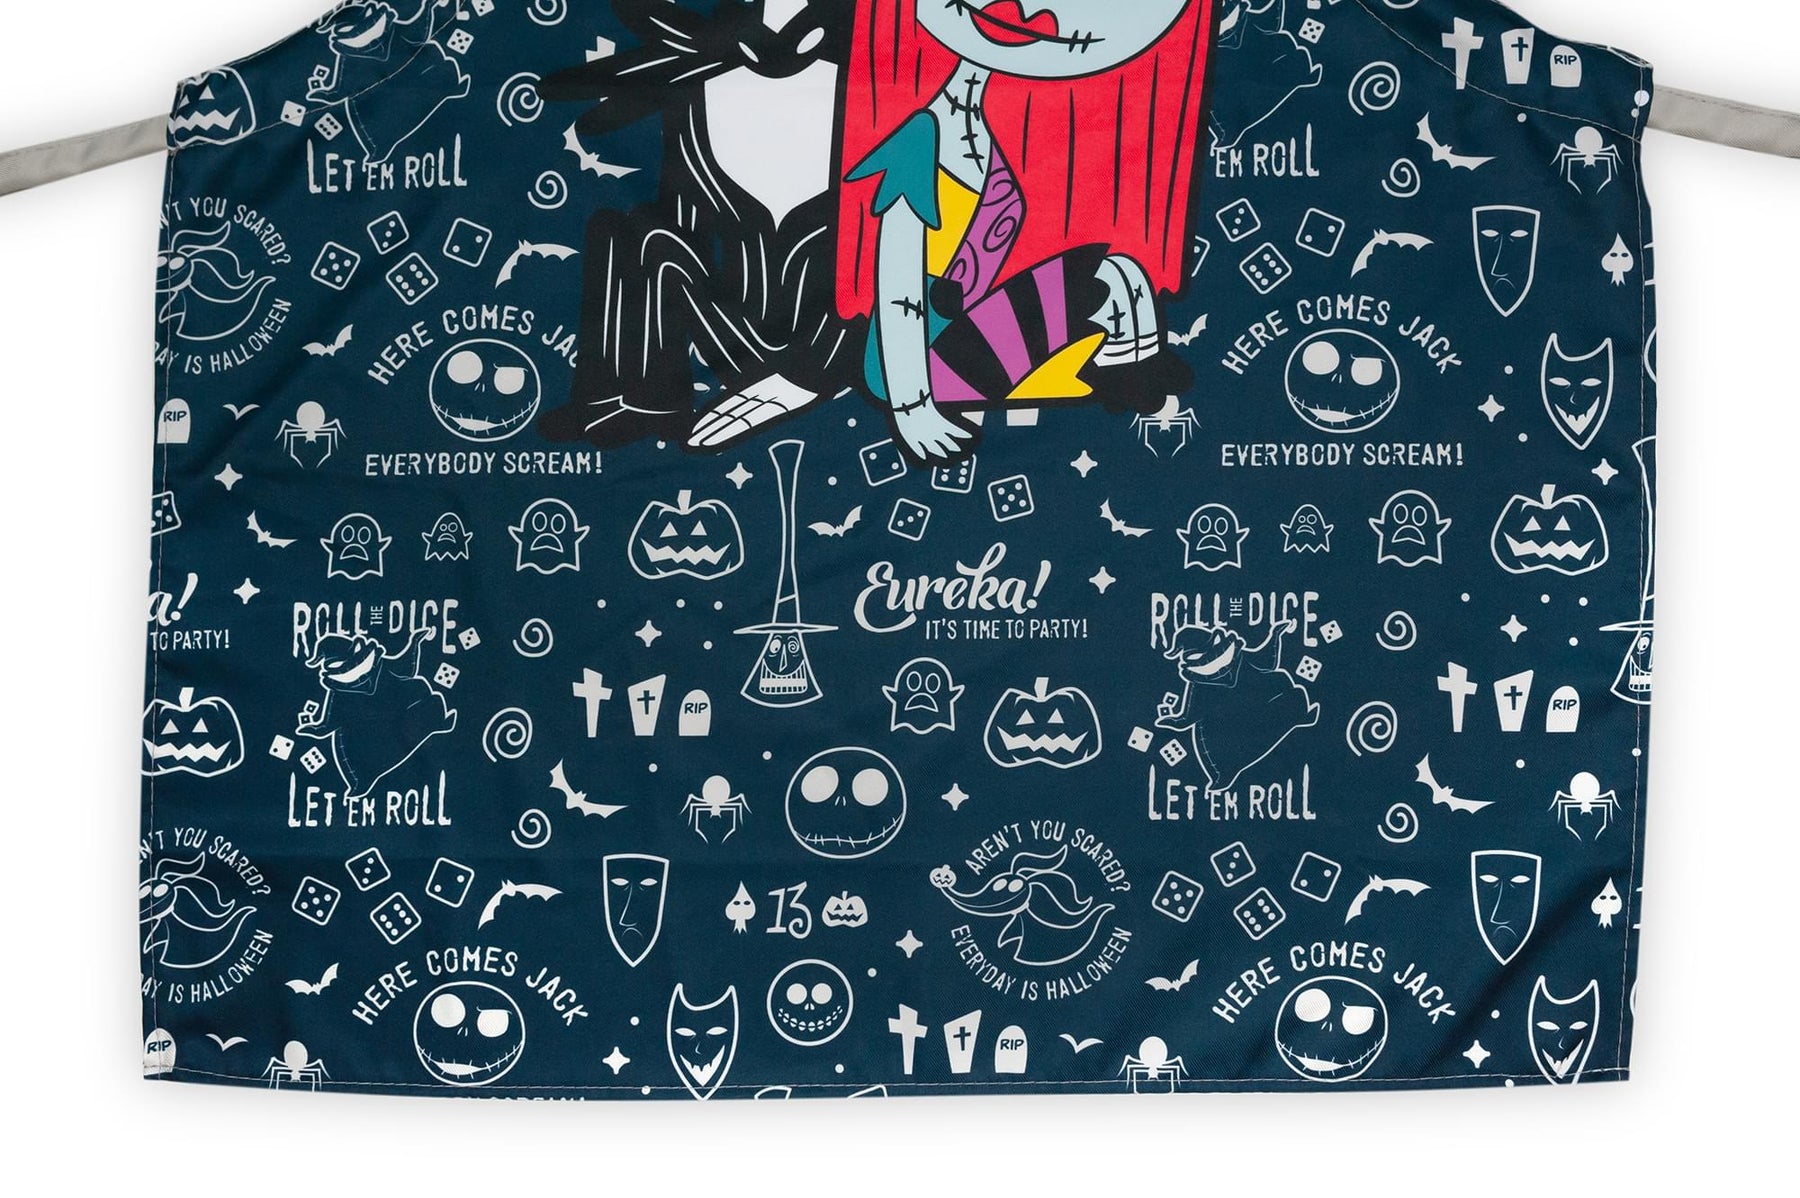 Nightmare Before Christmas Apron with Jack & Sally and Adjustable Straps - Black